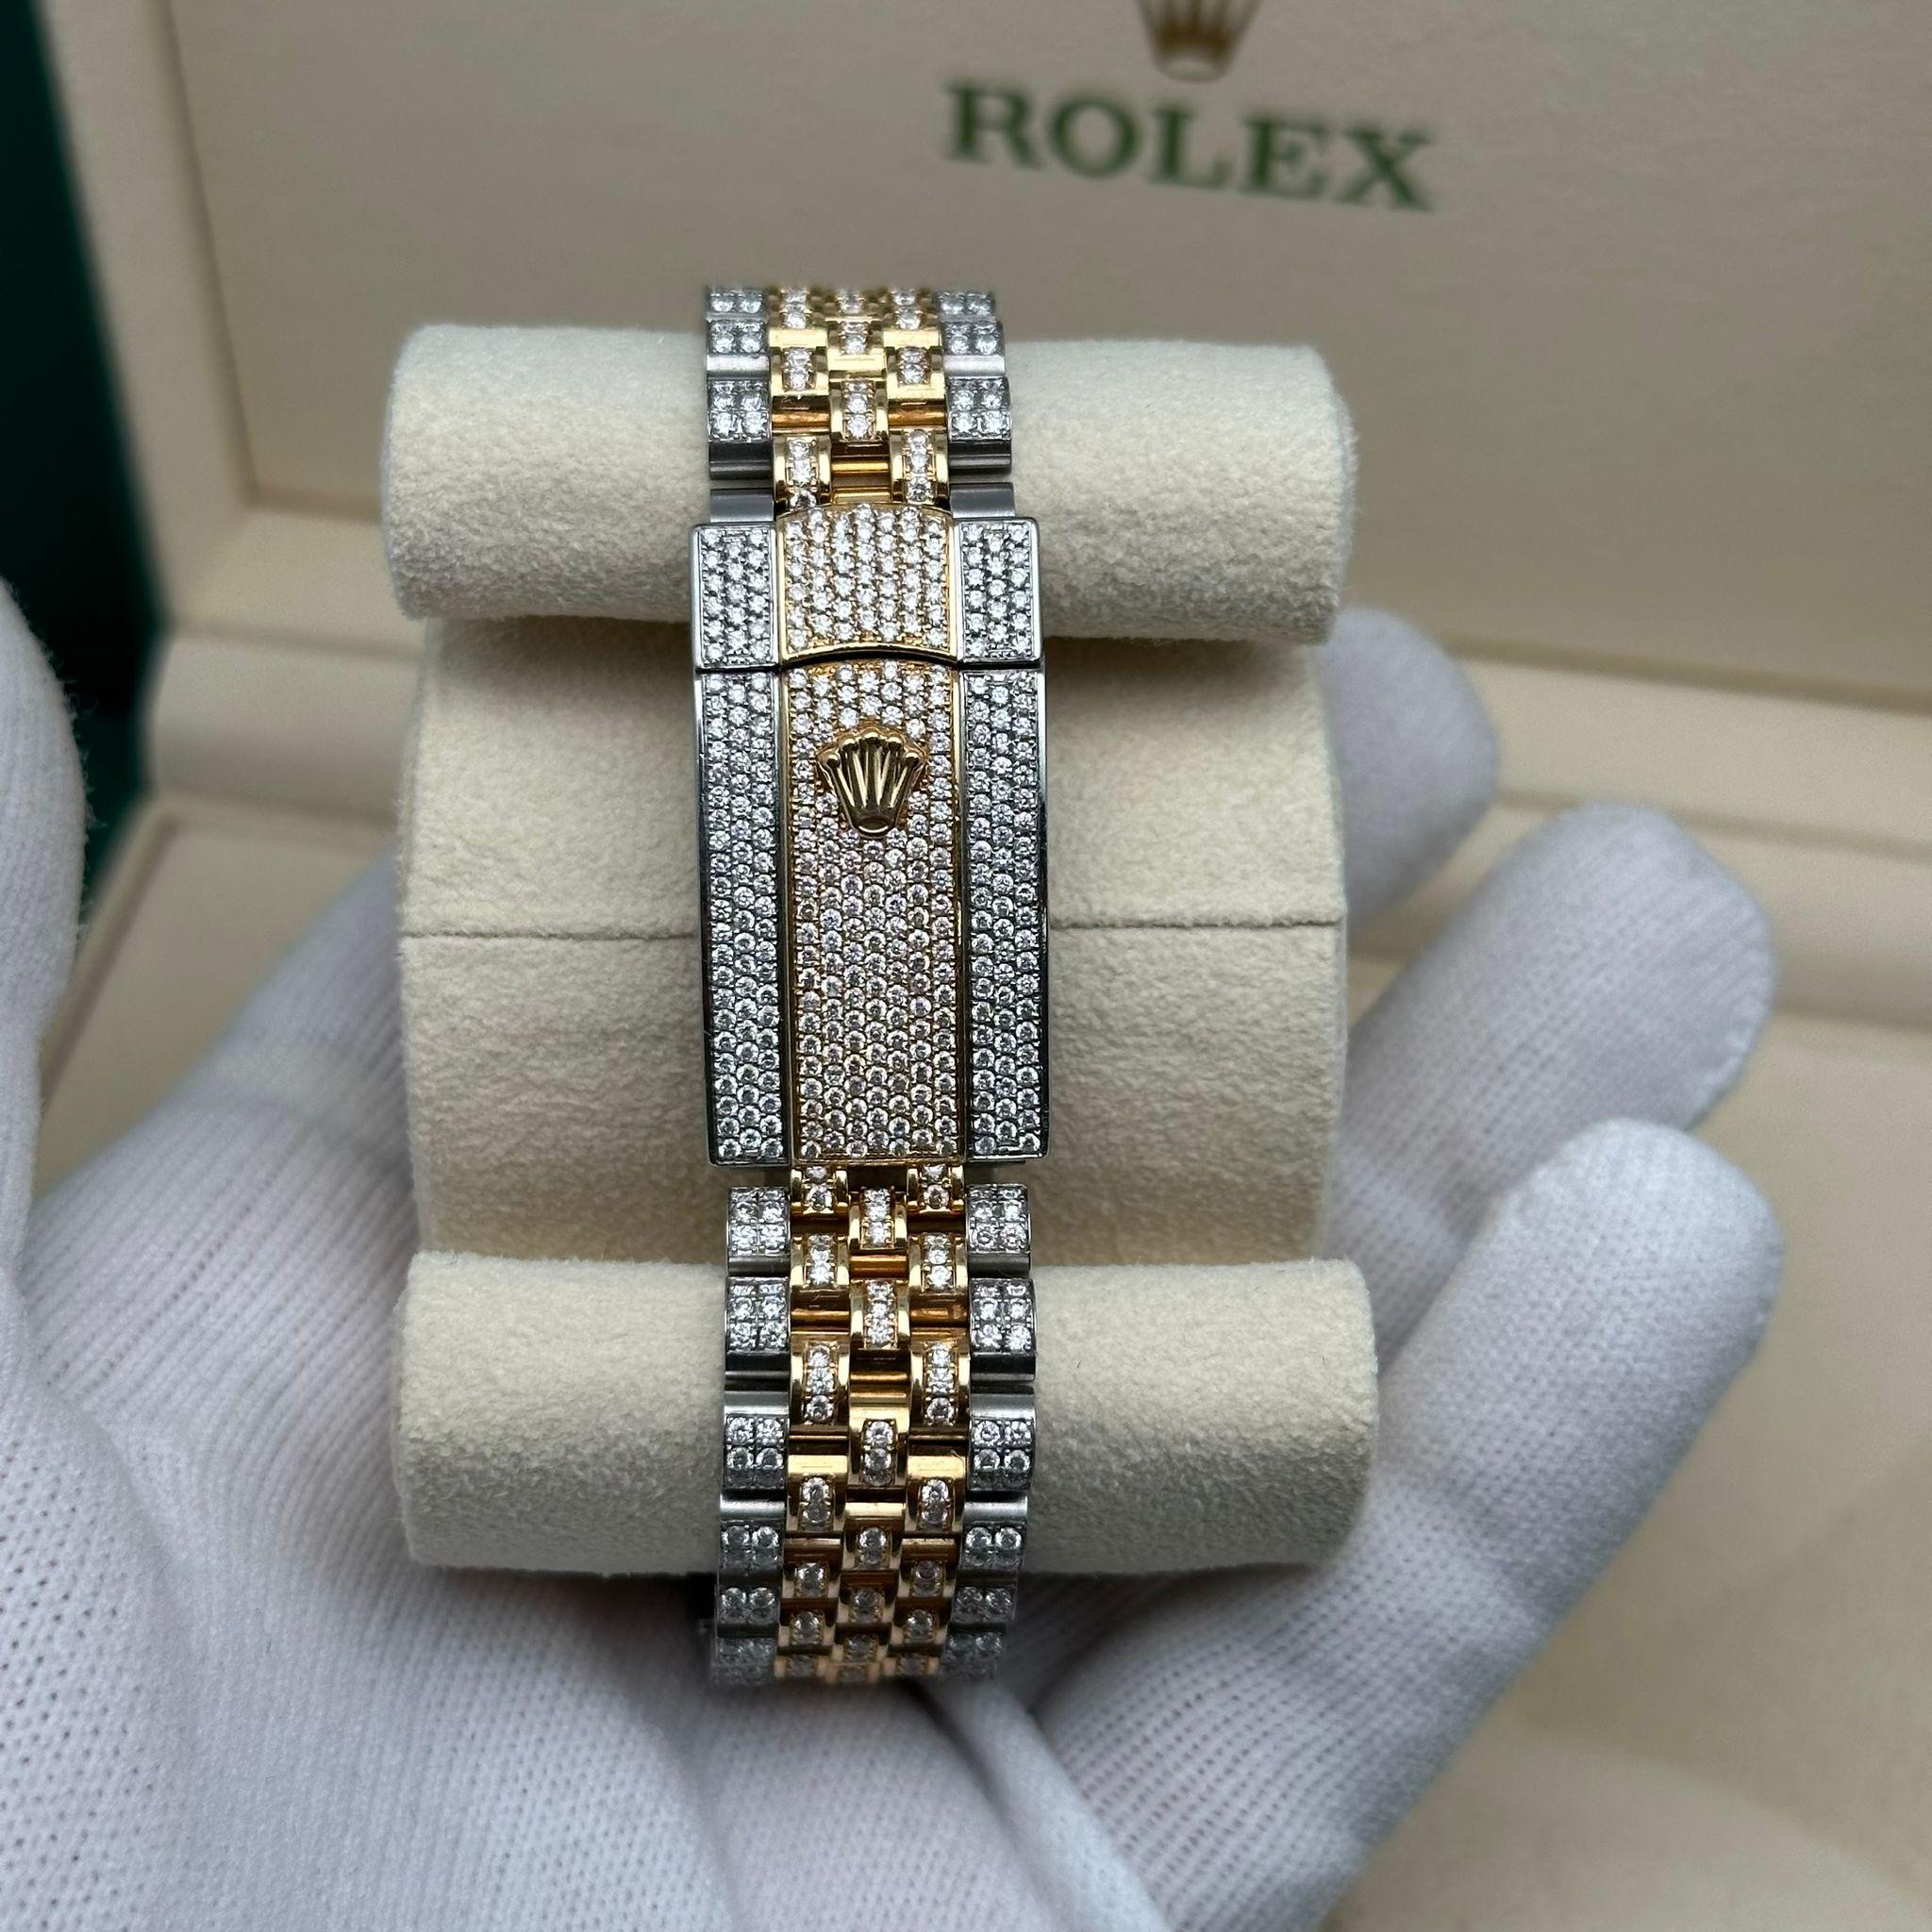 Rolex Datejust 41 18K Gold SteelCustom Fully Iced Out Jubilee Watch 126333 For Sale 7